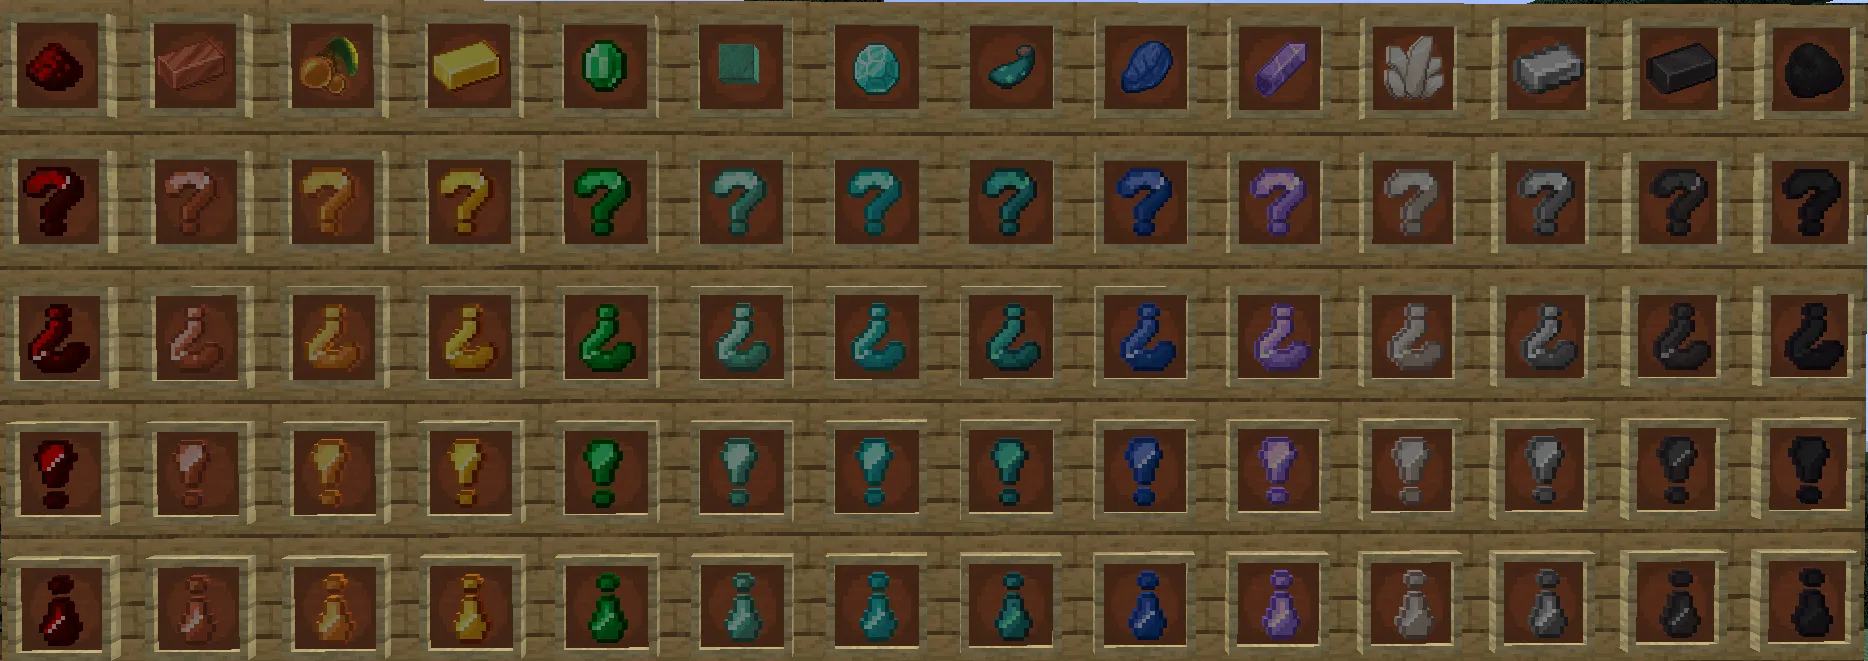 Display of all 56 markers and the items their colors are based on (32x32 resource pack)